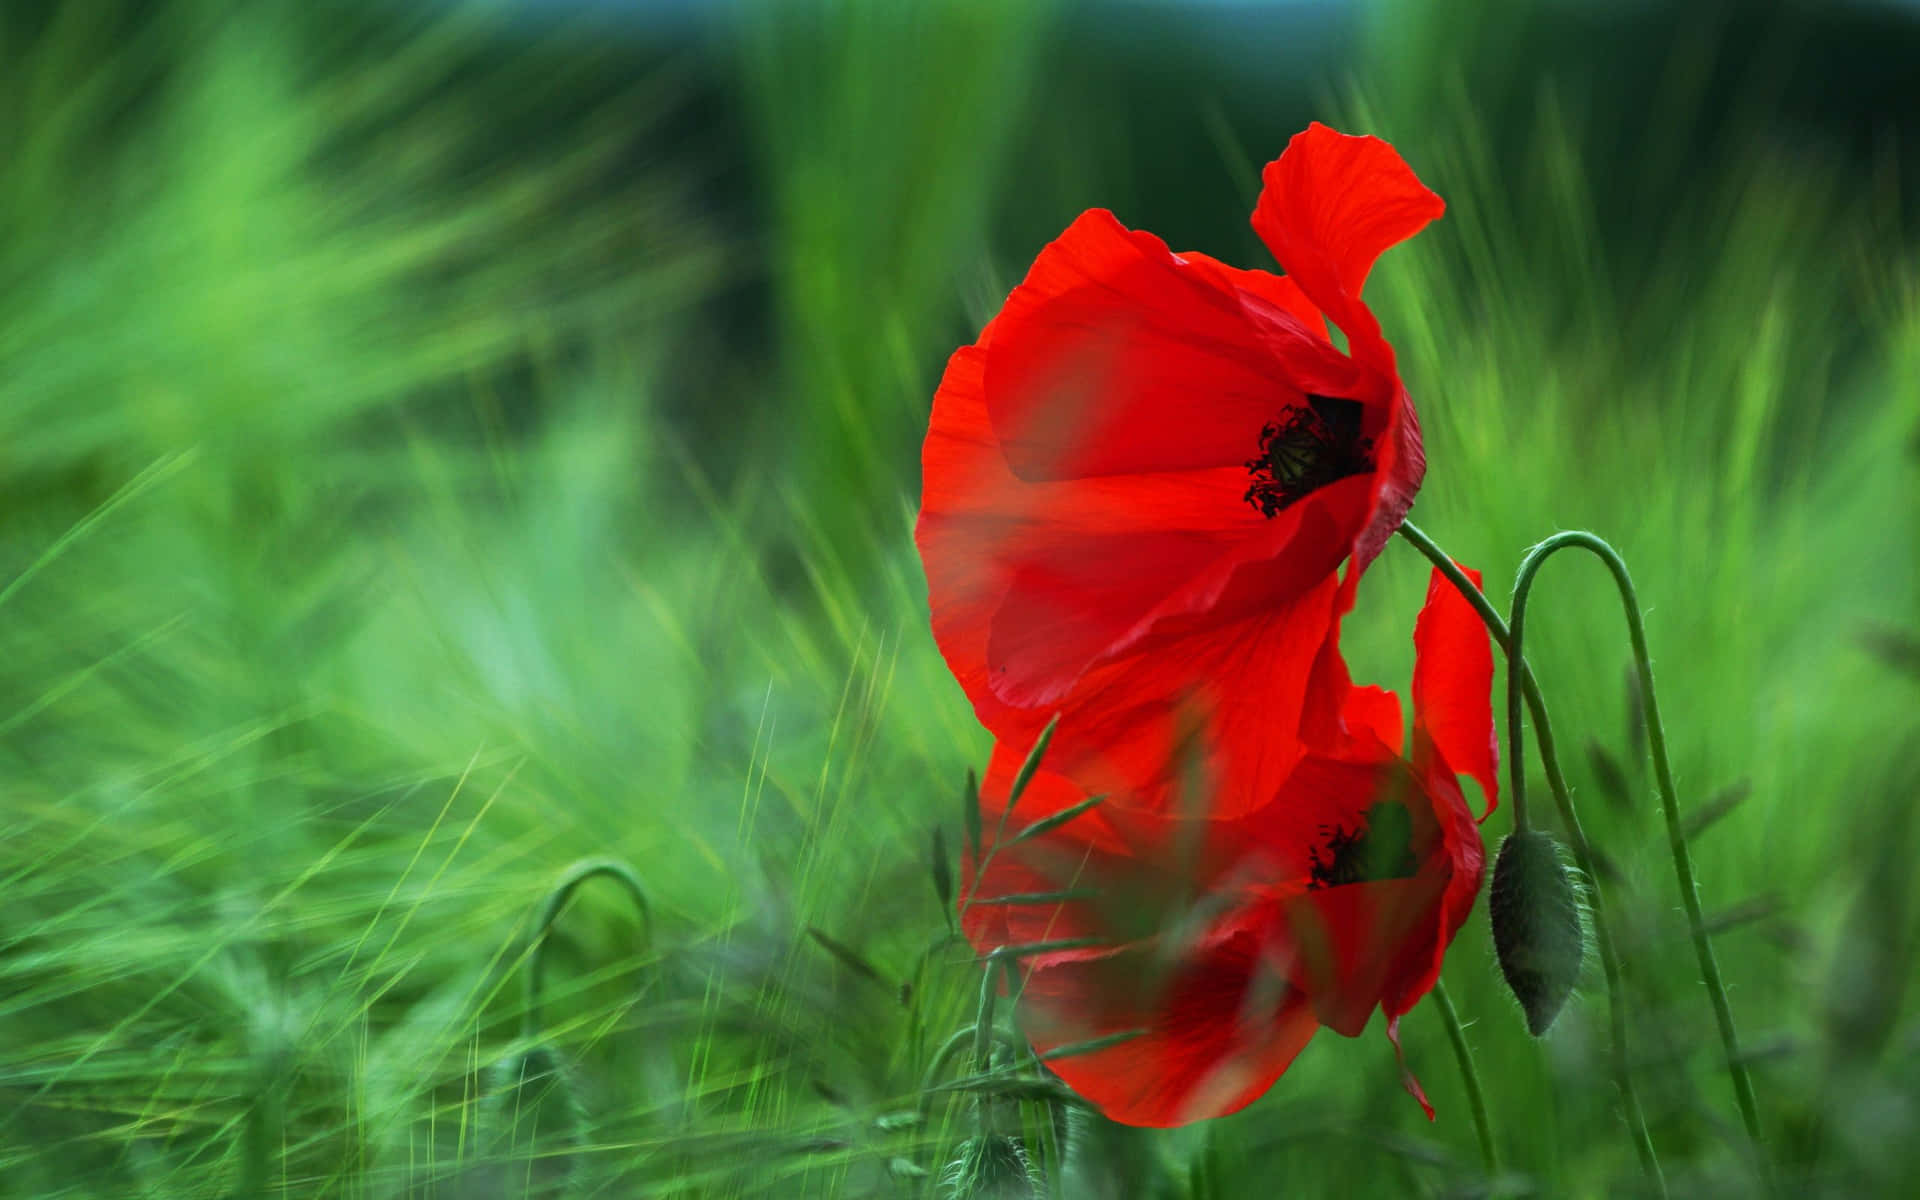 two red poppies in the grass